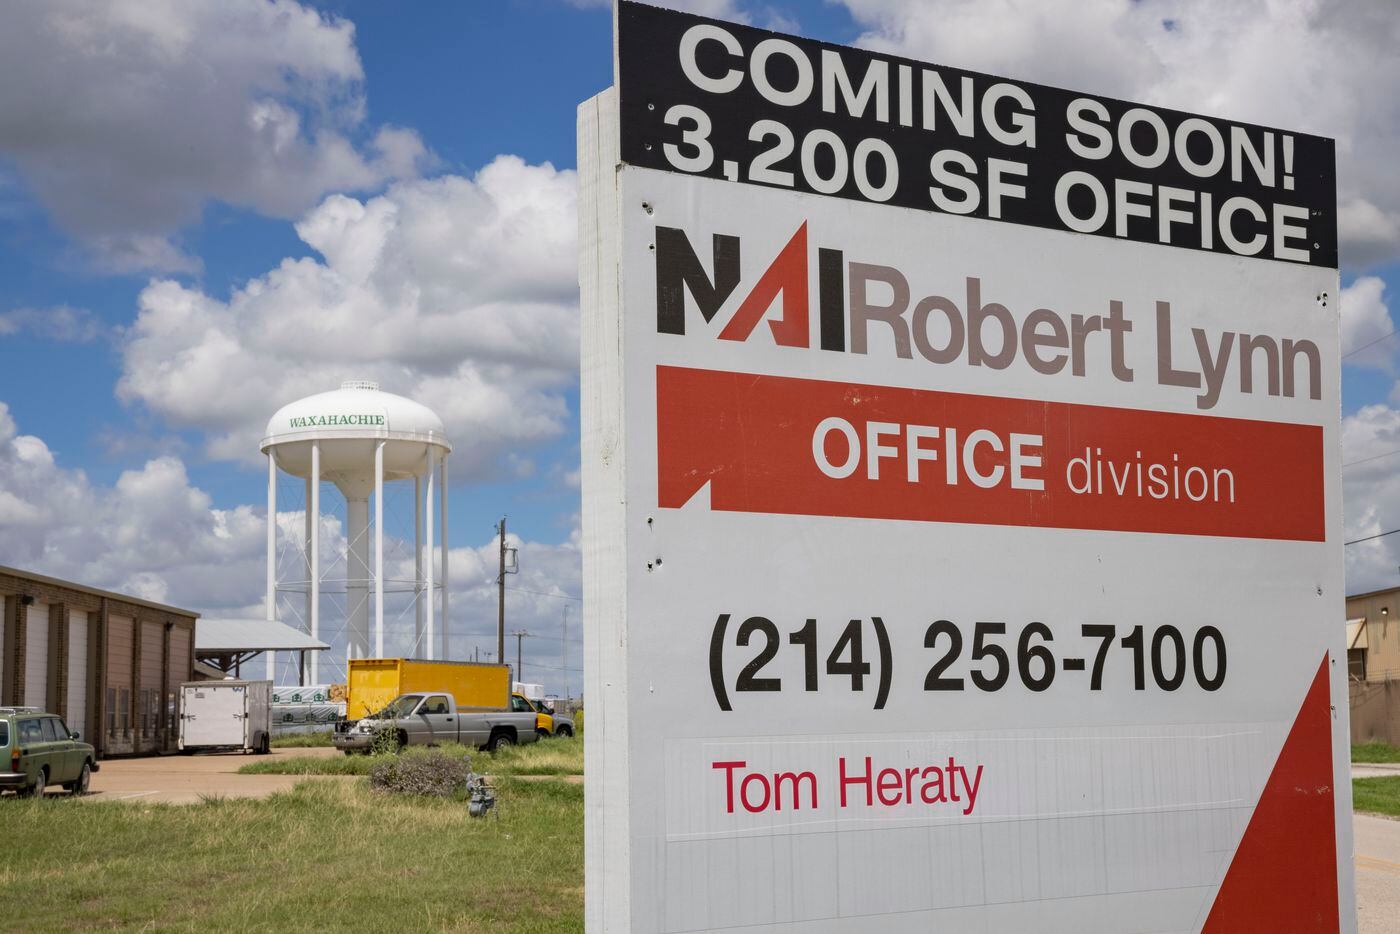 A Waxahachie water tower seen behind a coming soon office sign on Monday, Aug. 29, 2022, in...